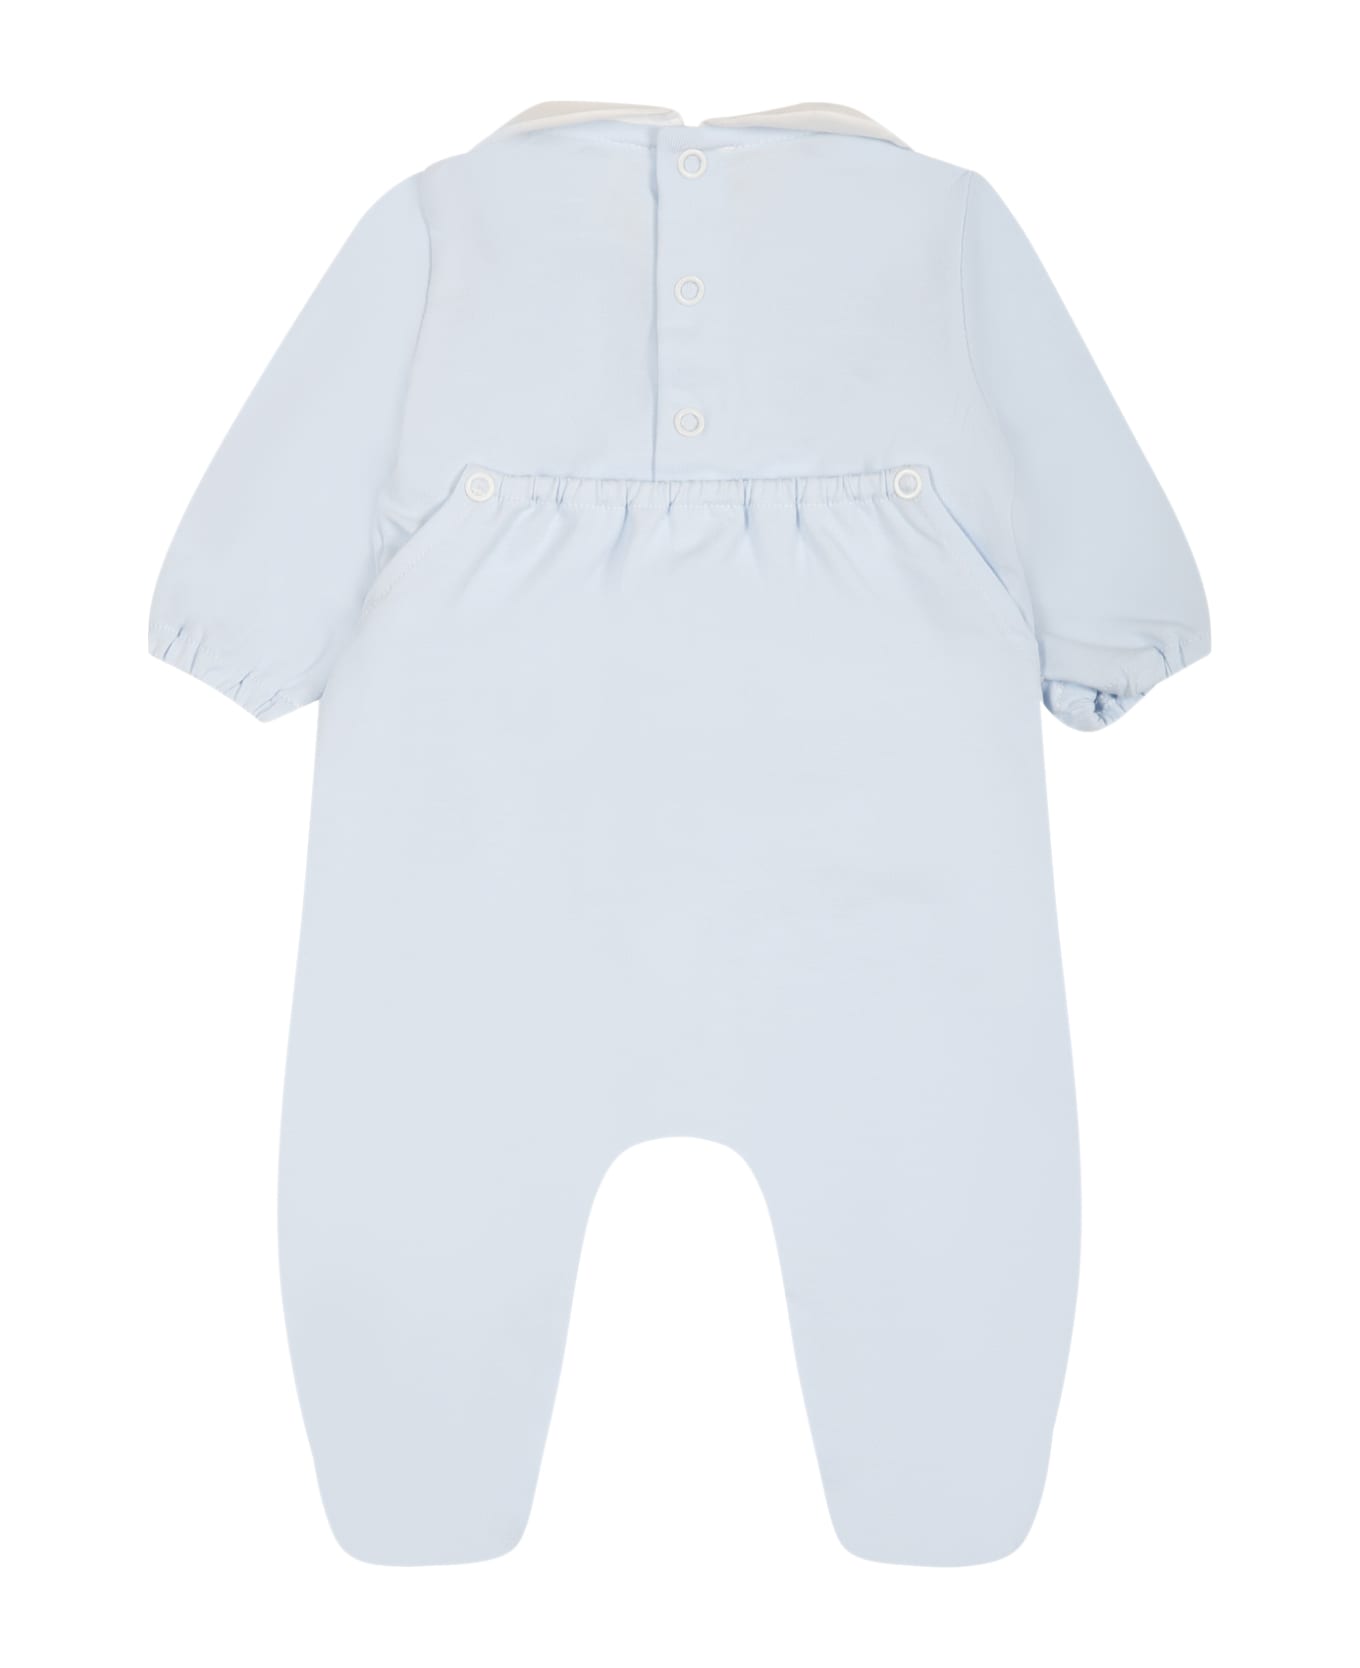 Little Bear Light Blue Onesie For Baby Boy With Writing And Heart - Cielo ボディスーツ＆セットアップ